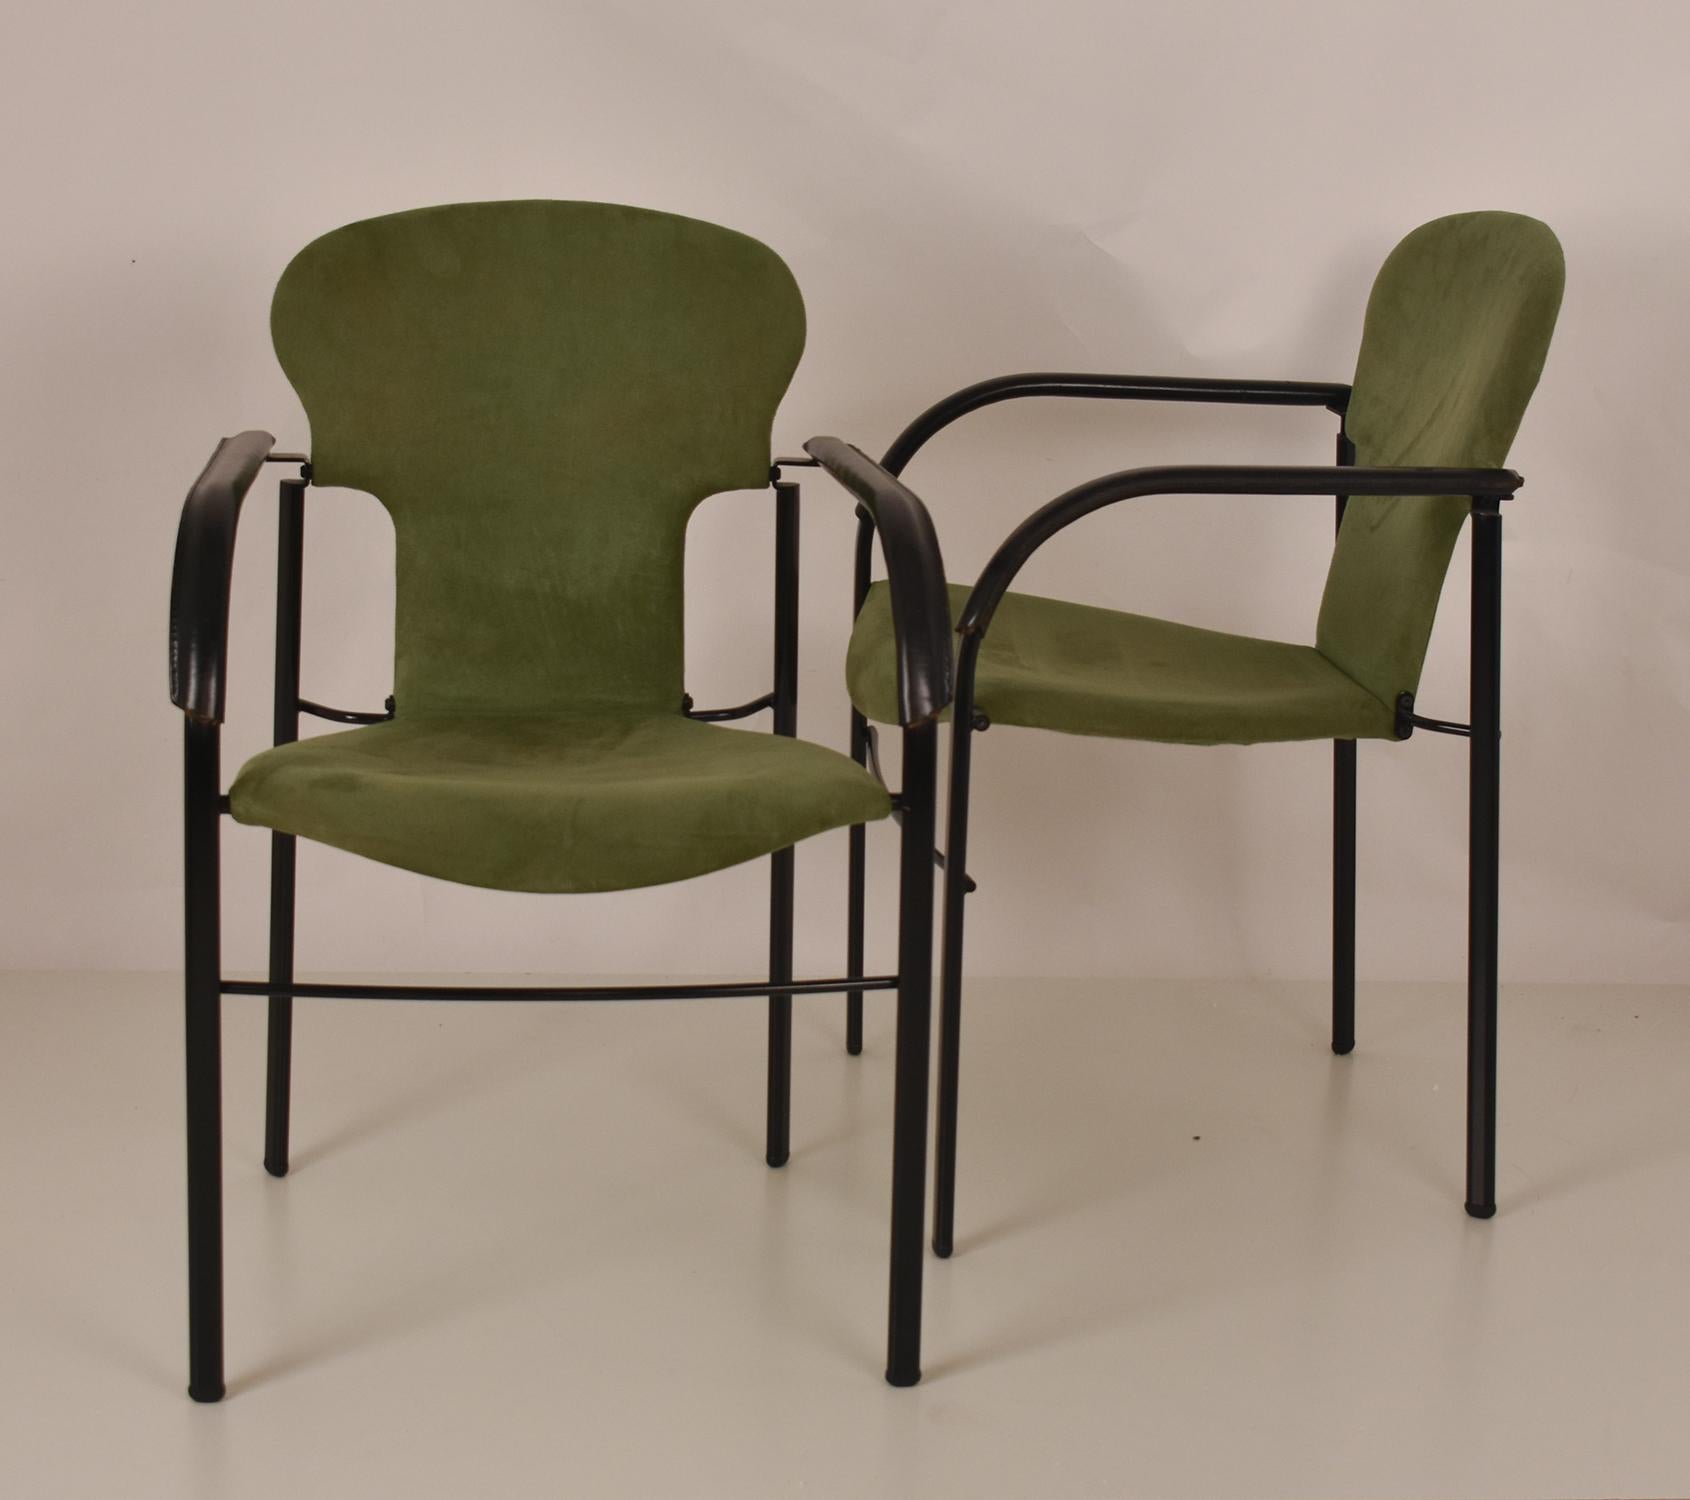 Modern Pair of Varius Green Armchair  Designed by Oscar Tusquets in 1983. Spain